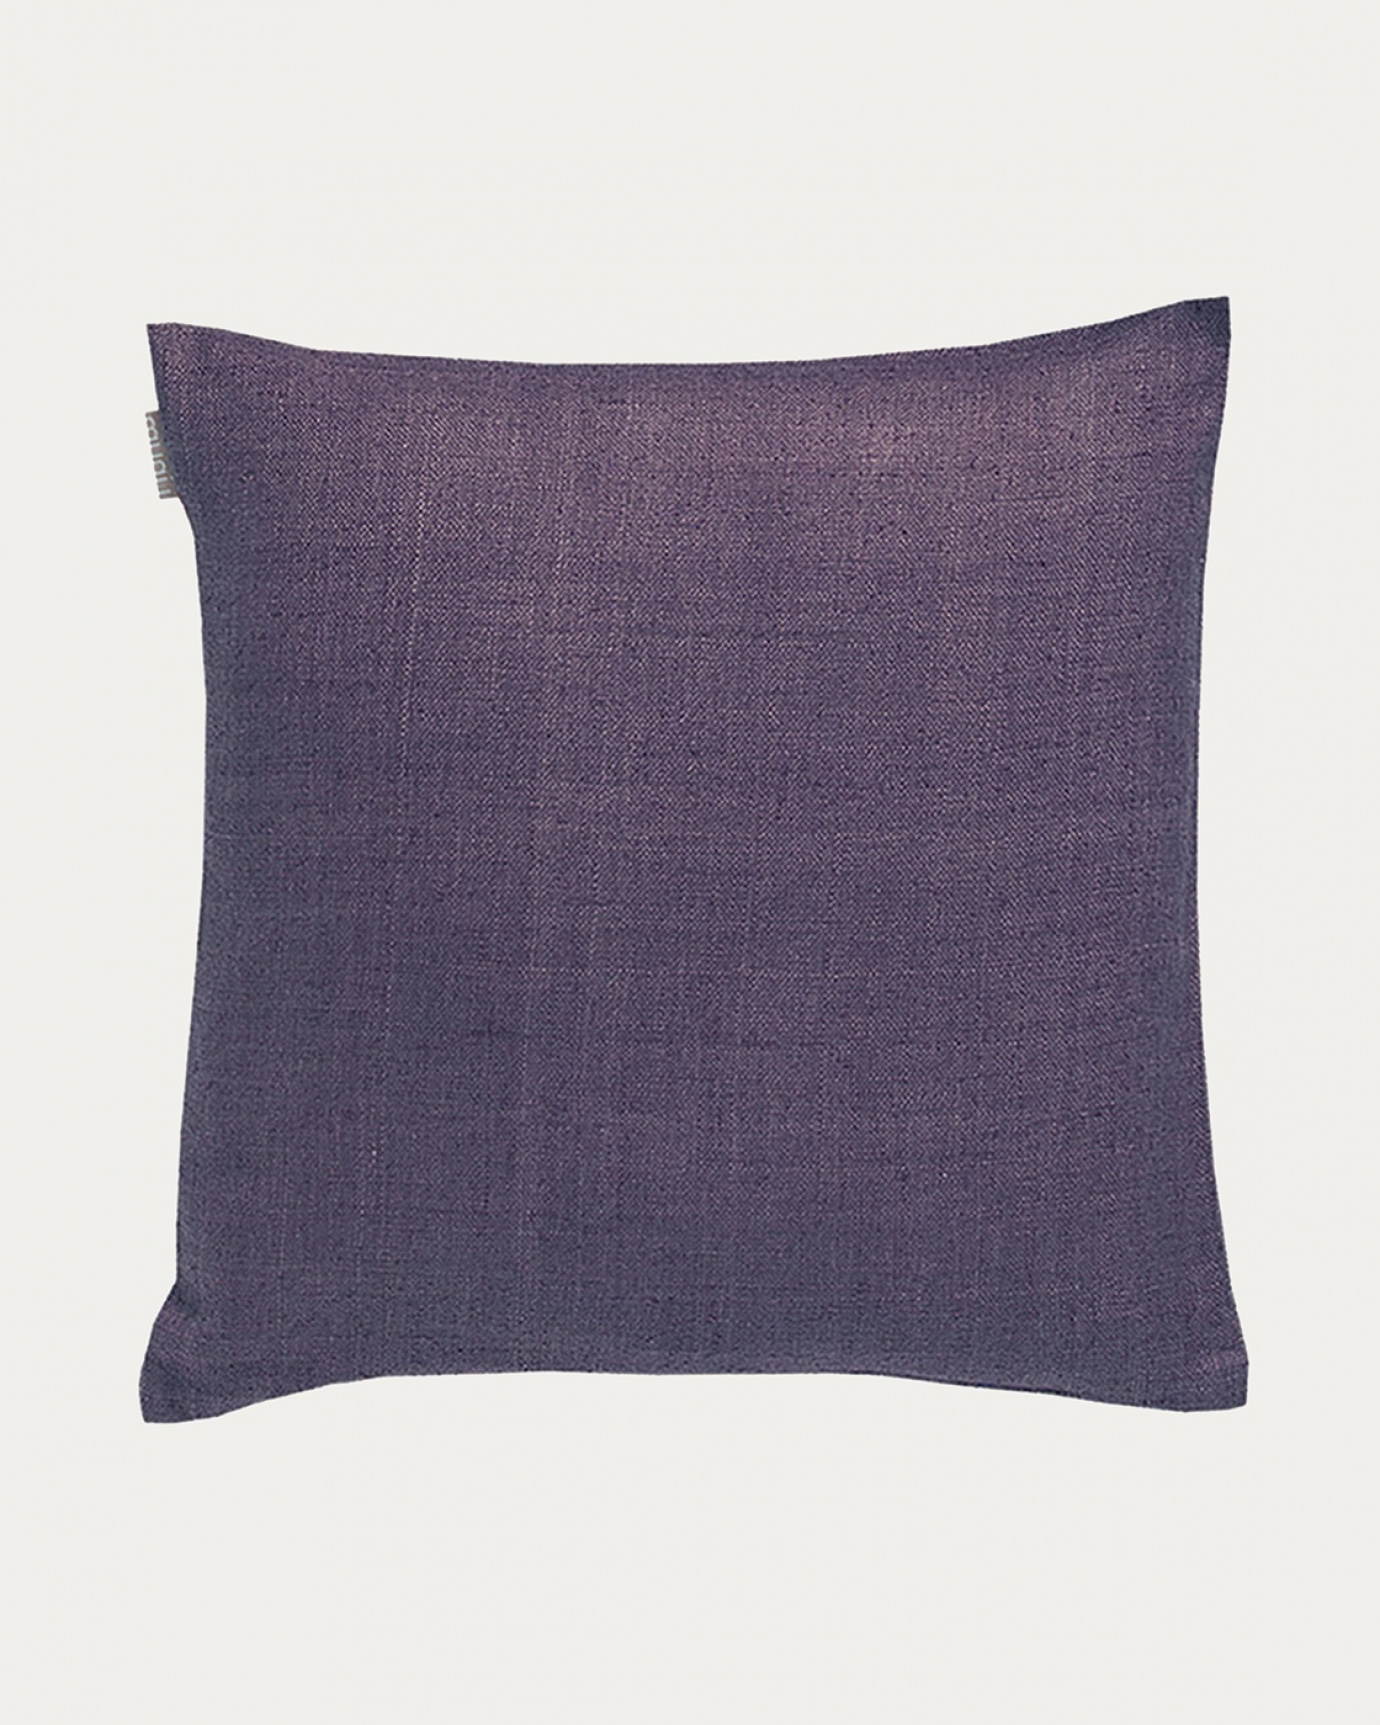 Product image dawn purple SETA cushion cover made of 100% raw silk that gives a nice lustre from LINUM DESIGN. Size 50x50 cm.